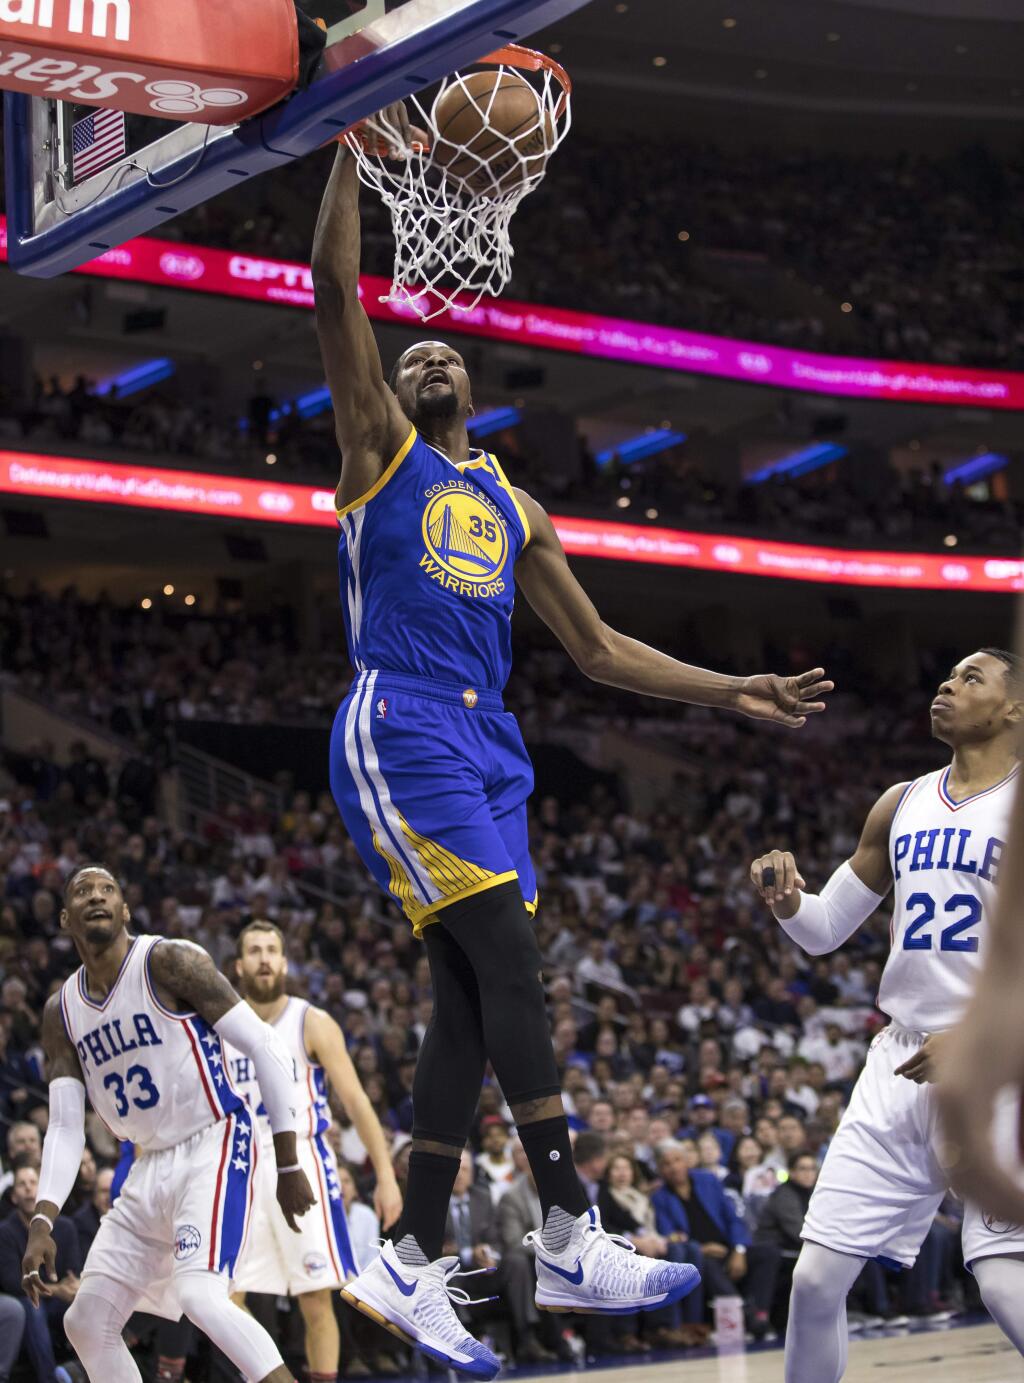 Golden State Warriors' Kevin Durant, center, goes up for the dunk during the first half of an NBA basketball game against the Philadelphia 76ers, Monday, Feb. 27, 2017, in Philadelphia. (AP Photo/Chris Szagola)